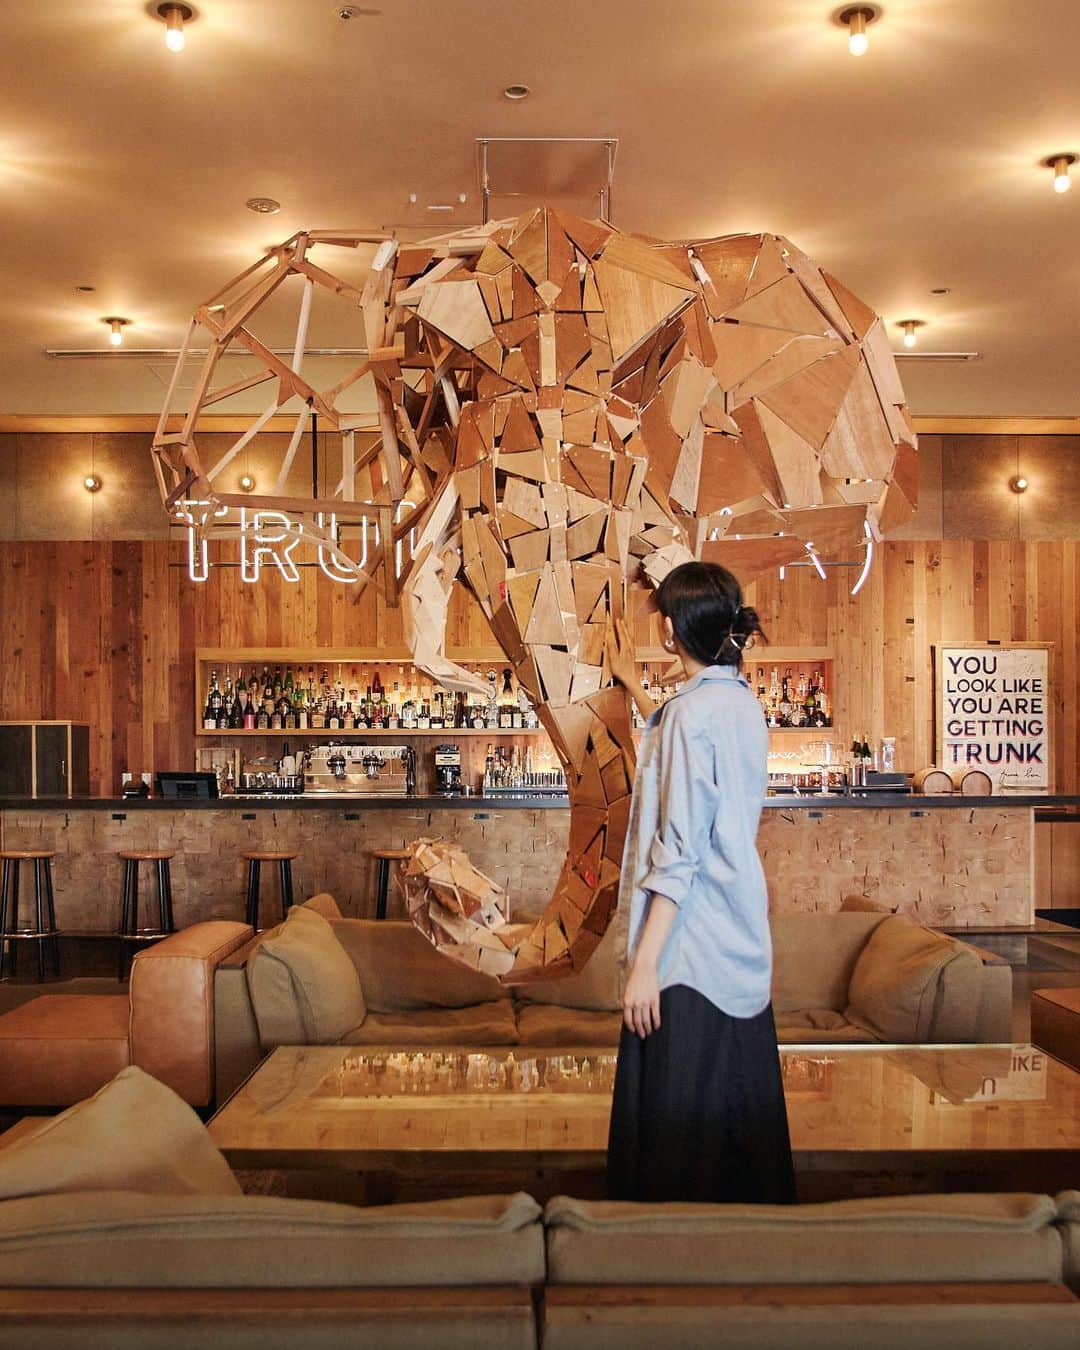 TRUNK(HOTEL)のインスタグラム：「【NEW LOUNGE INSTALLATION ART】  進化ってなんだろう？  種類ごと 環境ごとに変化する木々 一人一人の素質に目を向けて 既にある魅力を蘇らせることのできる 人間へ進化する  スクラップアンドビルドではない 文化と景色の残し方だってきっと美しい 進化の一つ  里山と同じで ほったらかしでは生まれない ちょうどいいバランスを  既にある小さな幸せ集め 愛でられる時代へ  偶然を楽しむように 美しい生き物の一部になった piecesと共に 未来へ向かって  location : TRUNK(HOTEL) - TRUNK(LOUNGE) title : pieces artist : Seiya Kaji  @19960308sk @trunkhotel_catstreet   AUGUST 4 ~  What does evolution truly mean?  The trees evolve with each species and its surroundings,Directing attention to the potential within each person,Progressing into humans who can revive existing charm. It's not about scrapping and rebuilding,But rather, a graceful way of preserving culture and landscapes,A beautiful form of evolution. Like the rustic countryside,It doesn't come into being by neglect,But finding just the right balance. Collecting the existing little joys,Transitioning into an era of cherished love. Embracing chance with joy,Becoming a part of beautiful living creatures,Together with the pieces, heading towards the future.  #trunk #trunkhotel #trunklounge #socializing #hotel #tokyo #jingumae #harajuku #lounge #artwork #art #sculpture #sculptures #animal #wood #scrap」